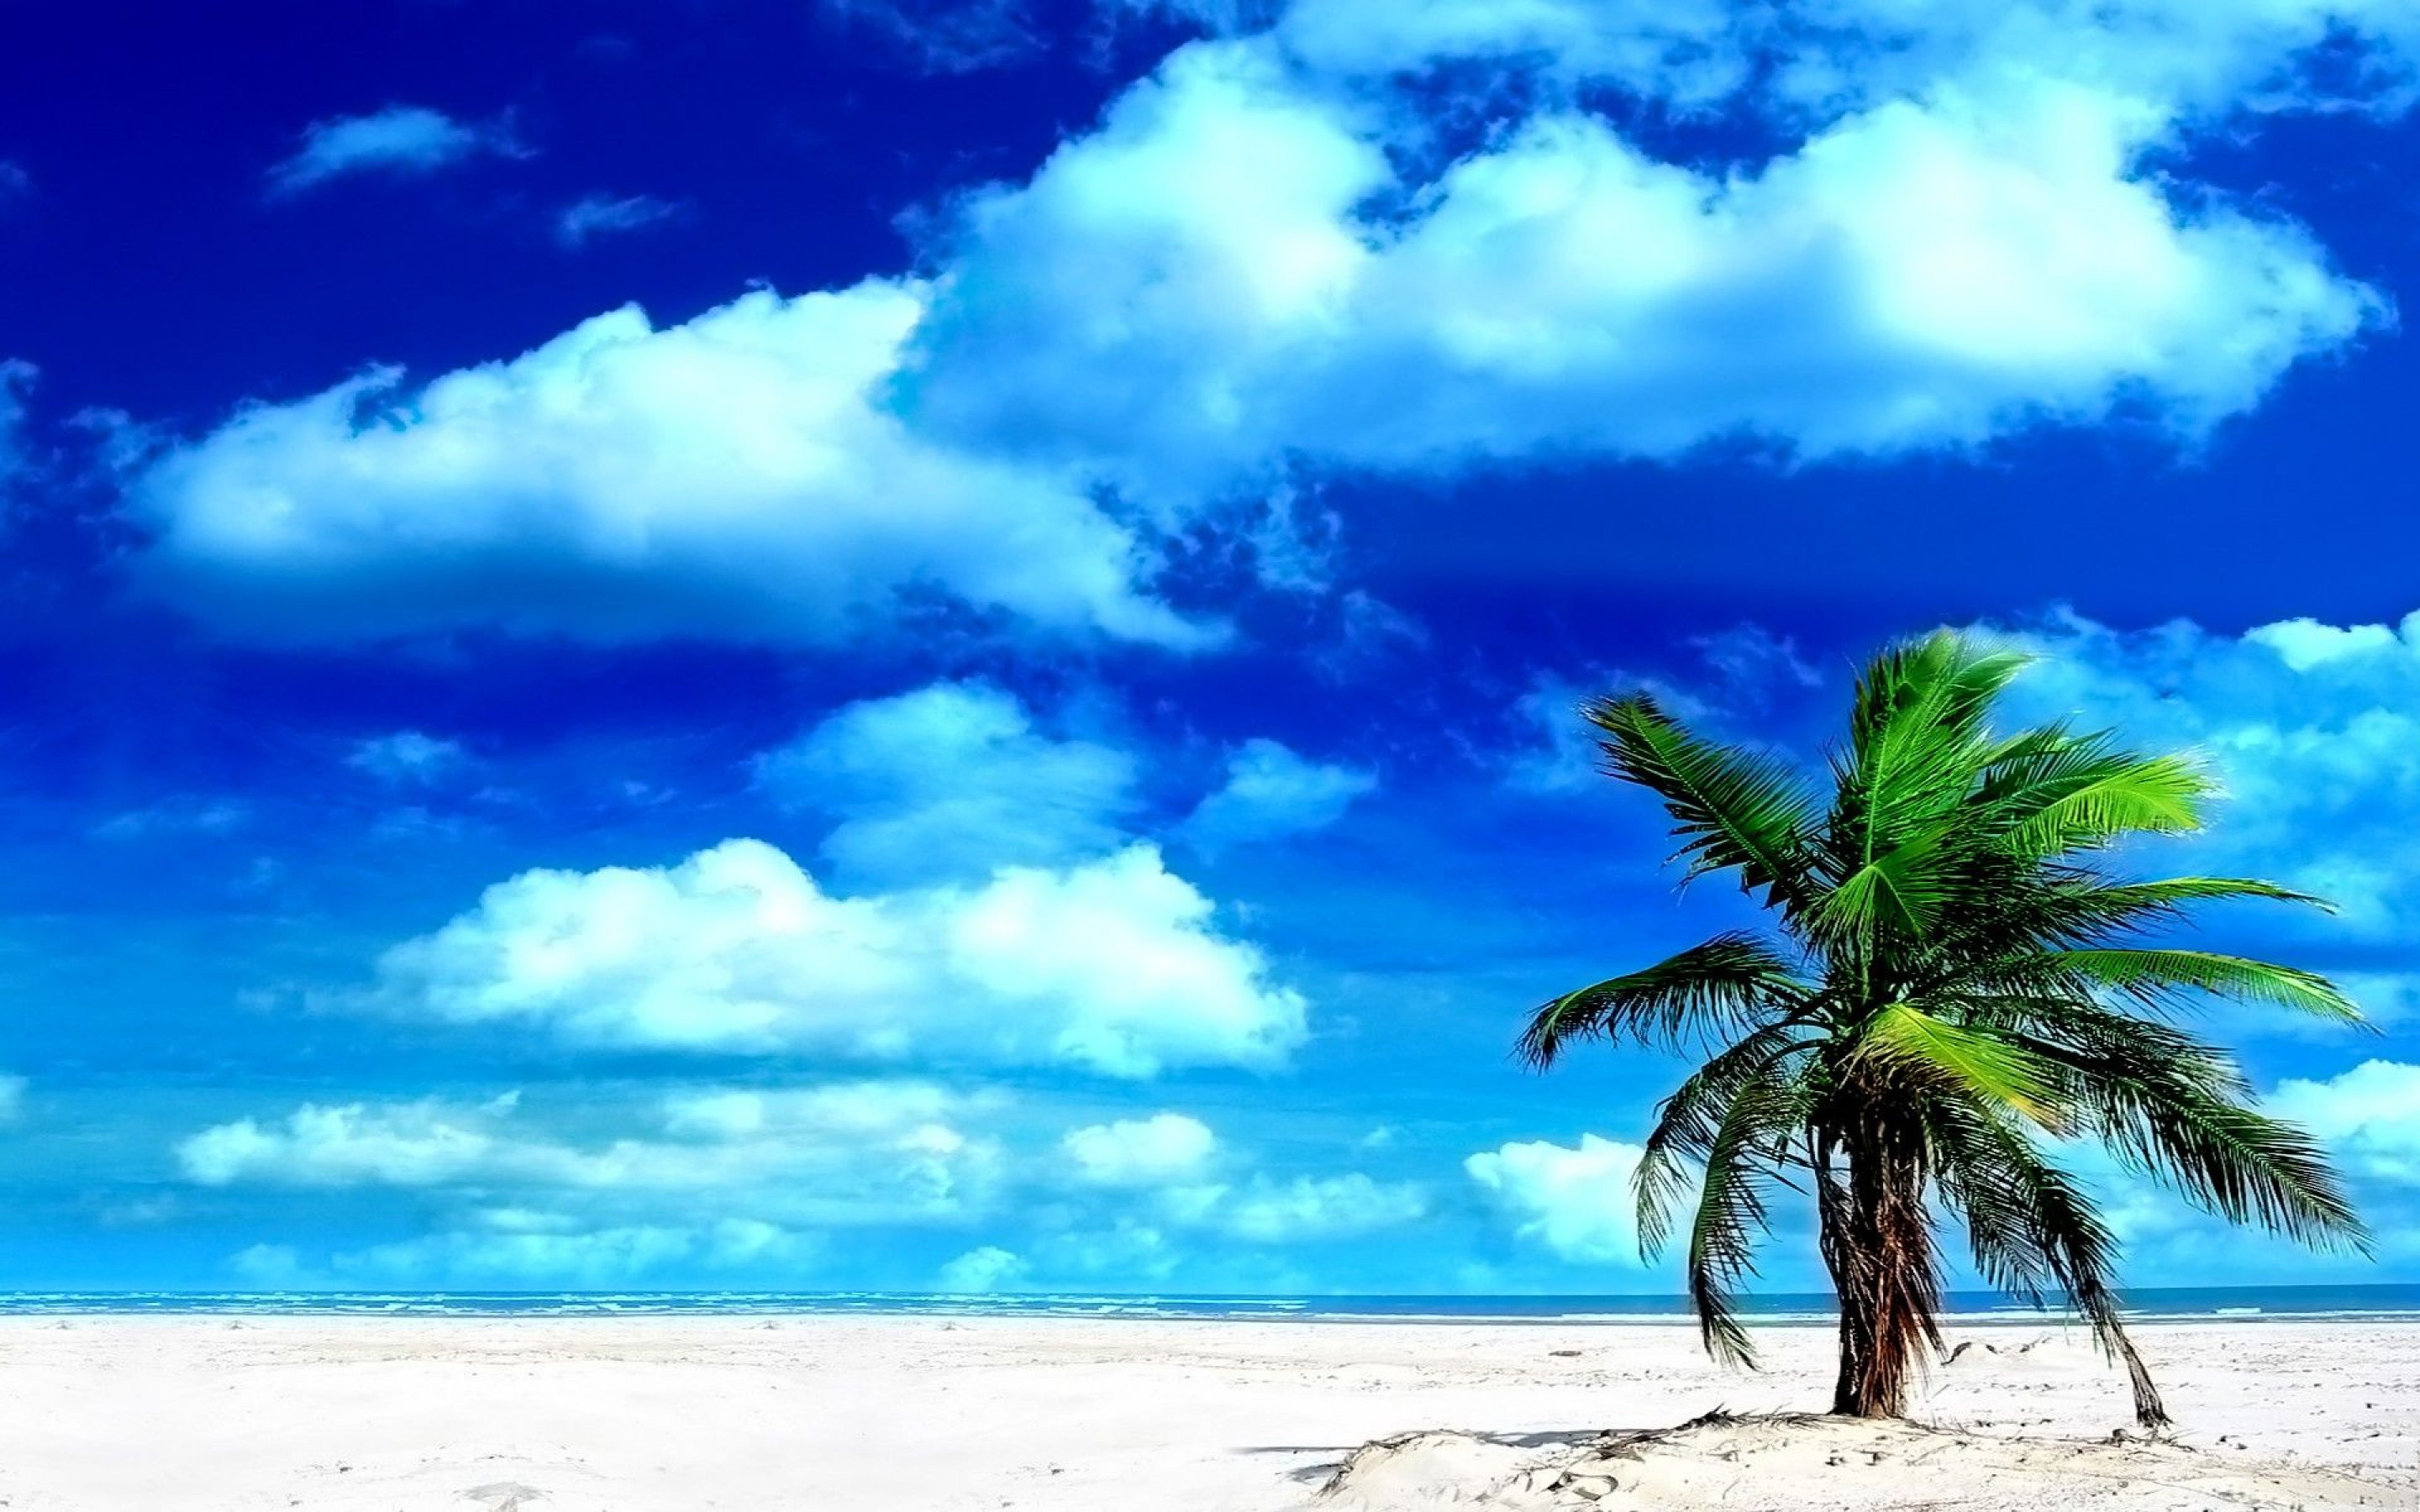 Tropical Island Spring Beach Shore Wallpaper In High Resolution At